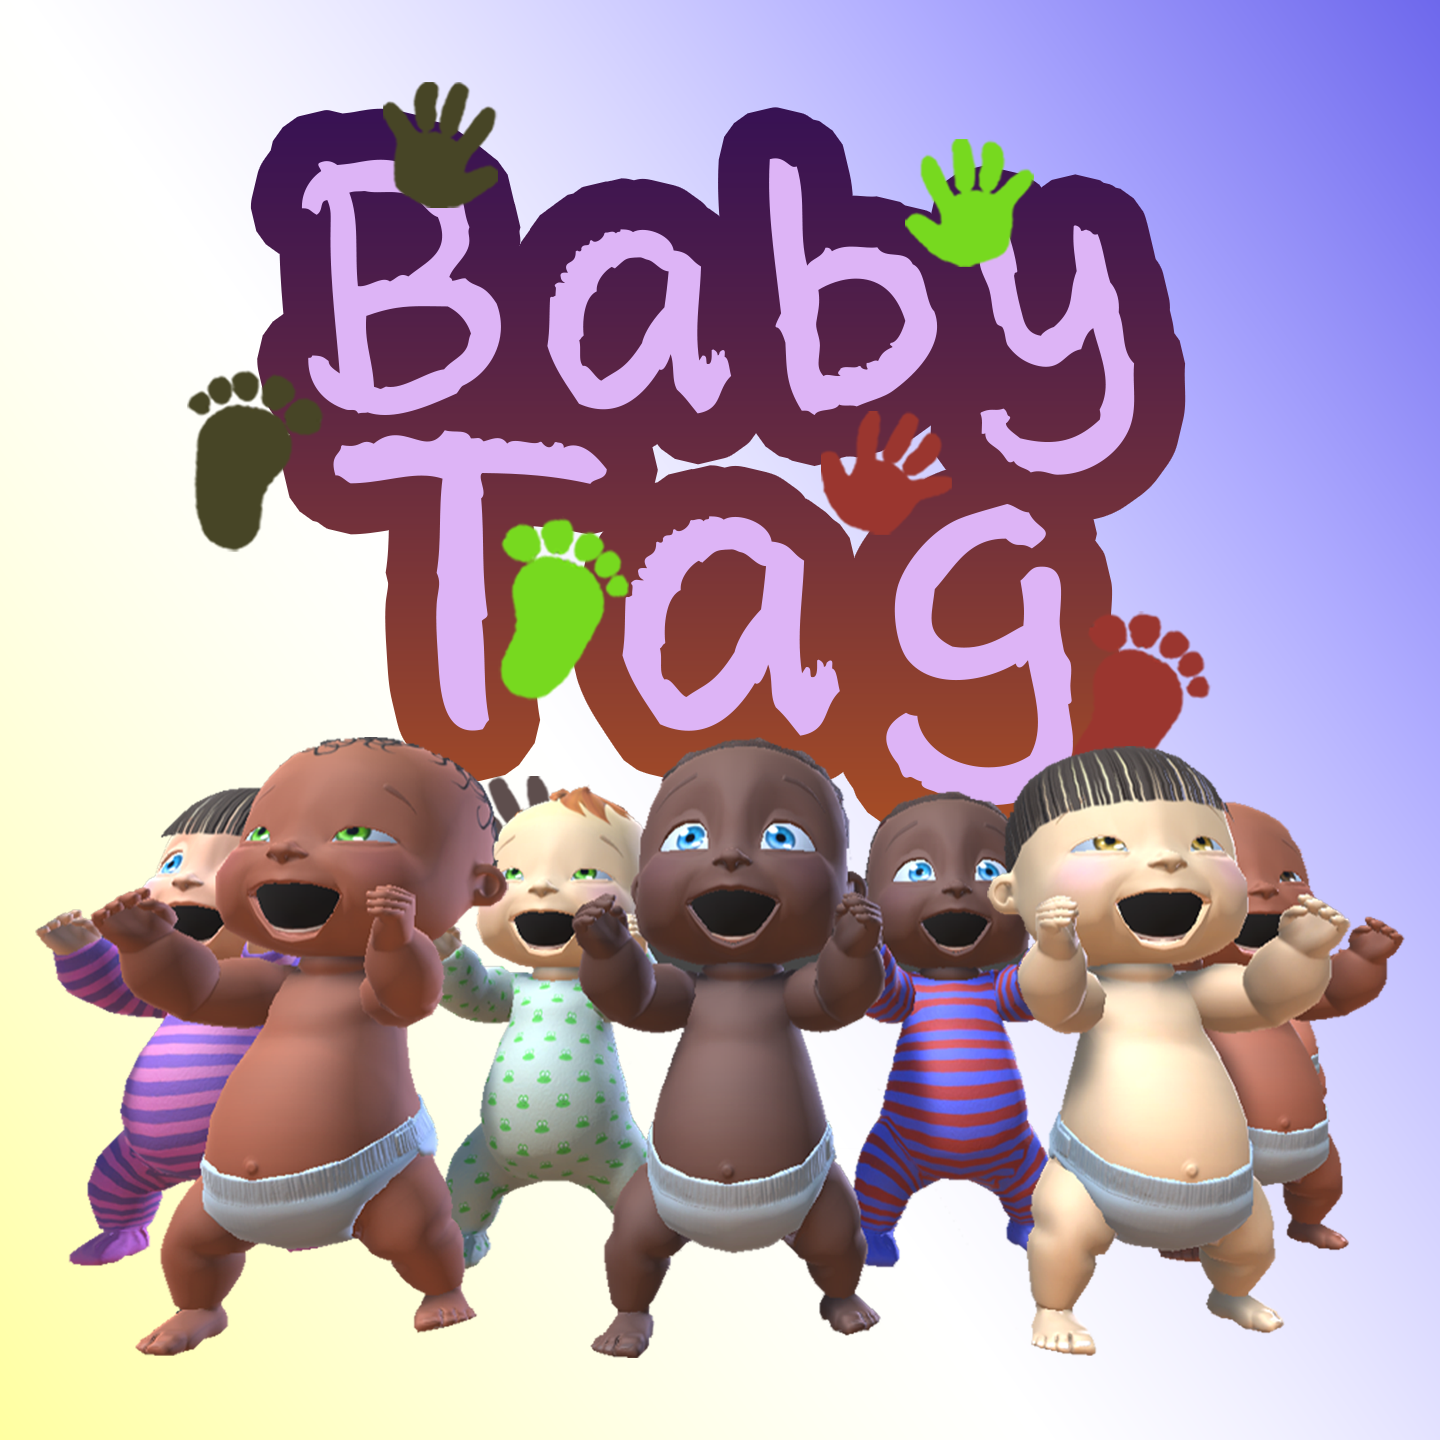 Ready go to ... https://sidequestvr.com/app/7133/baby-tag [ Baby Tag on SideQuest - Oculus Quest Games & Apps including AppLab Games ( Oculus App Lab )]